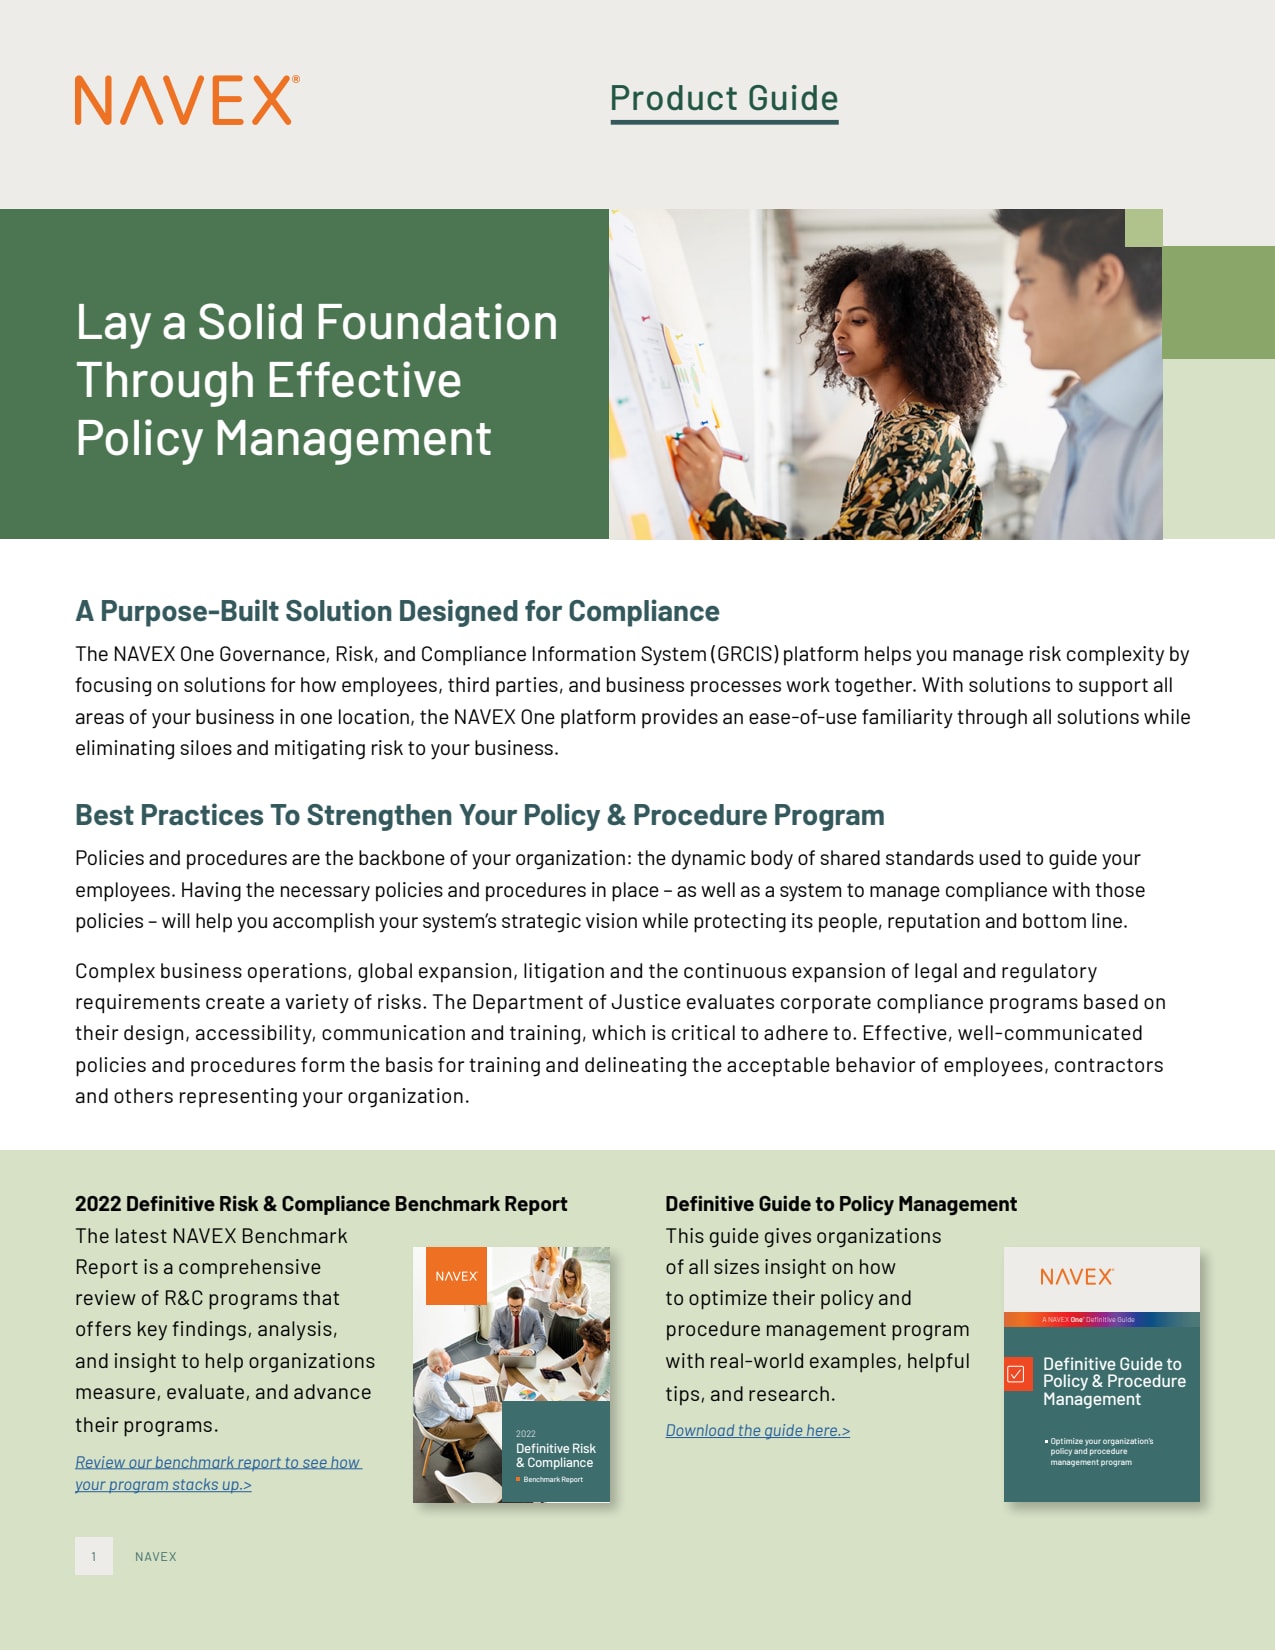 Lay a Solid Foundation Through Effective Policy Management